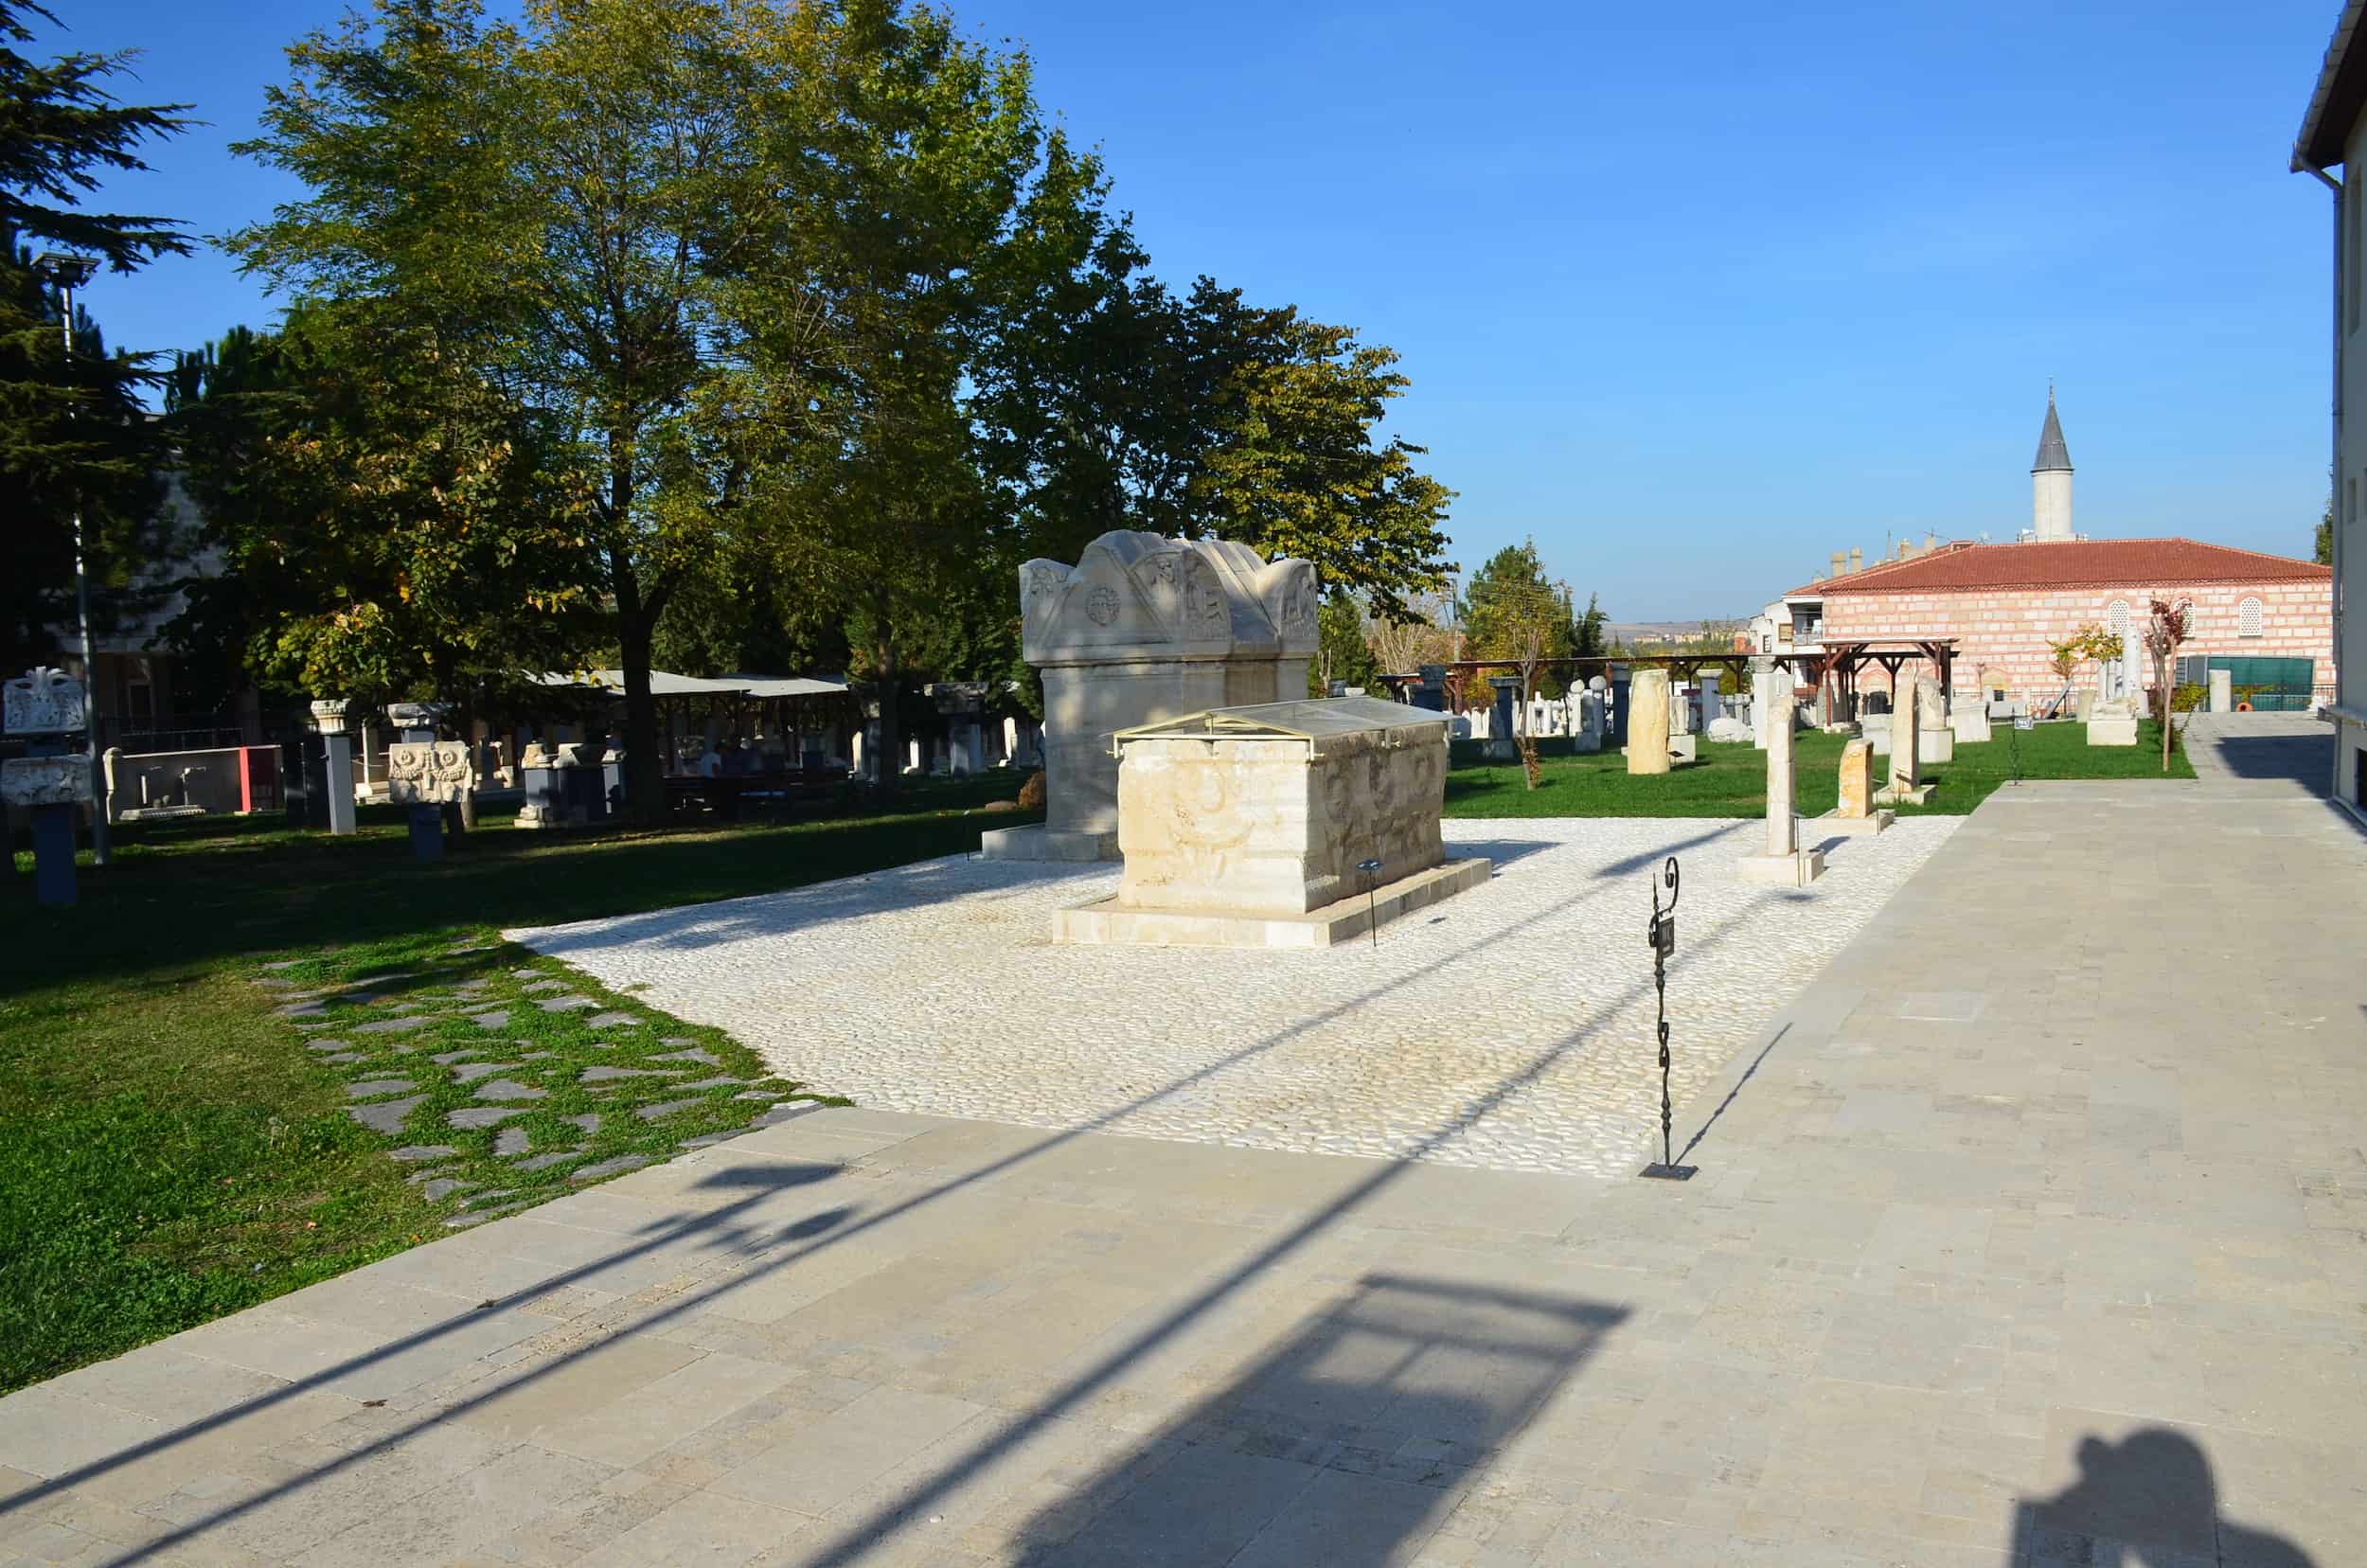 Garden at the Edirne Archaeology and Ethnography Museum in Edirne, Turkey